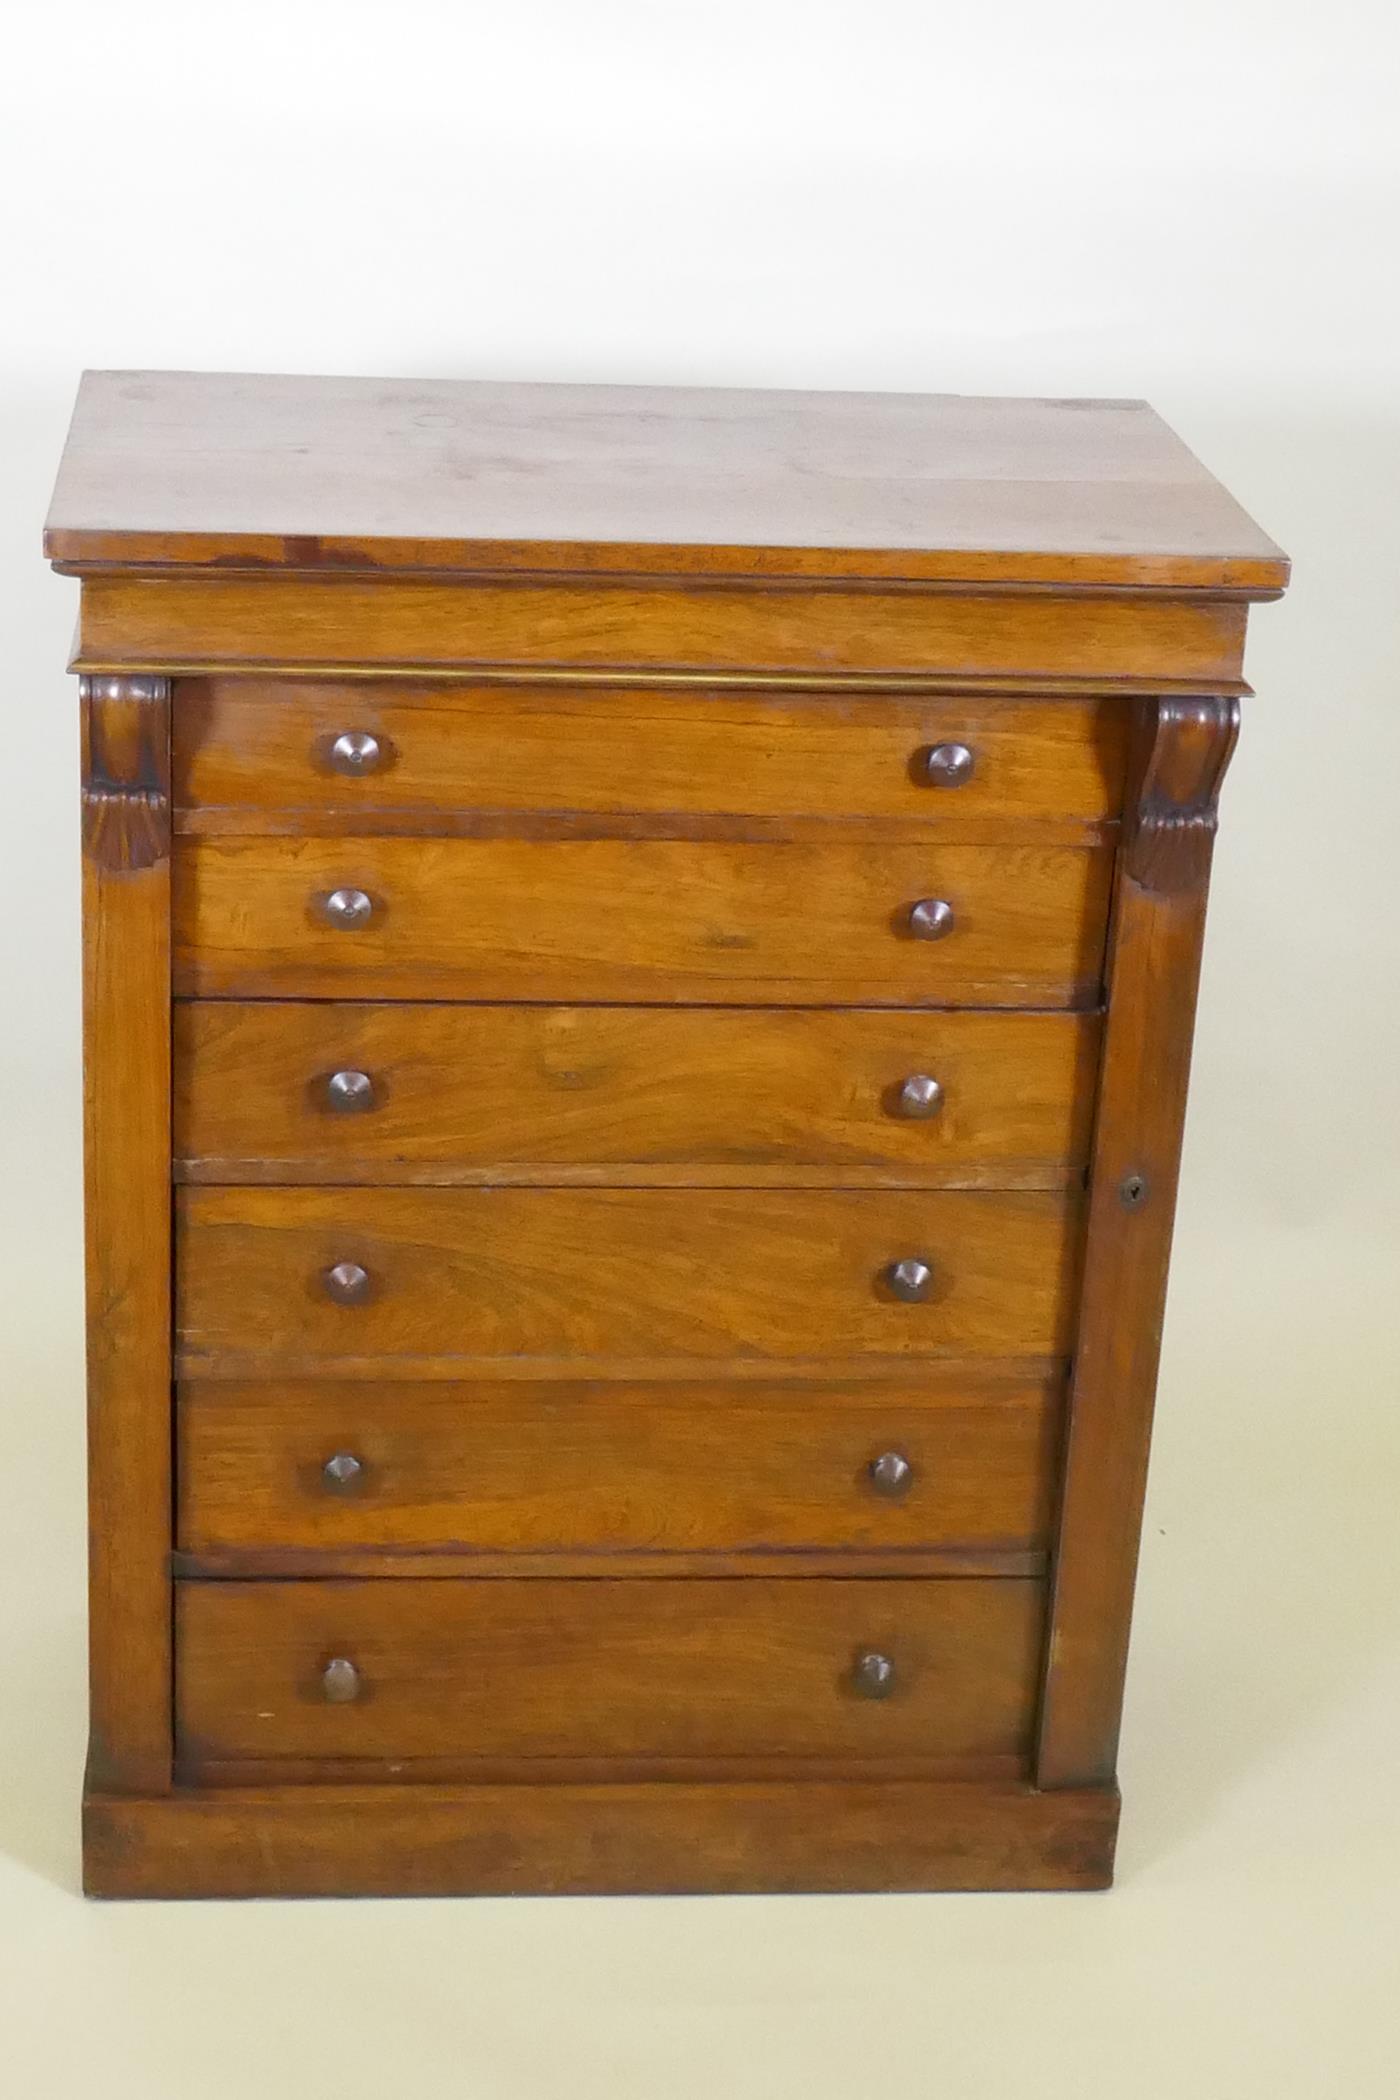 A C19th rosewood Wellington chest of six drawers, raised on a plinth base, 77 x 46 x 101cm - Image 2 of 8